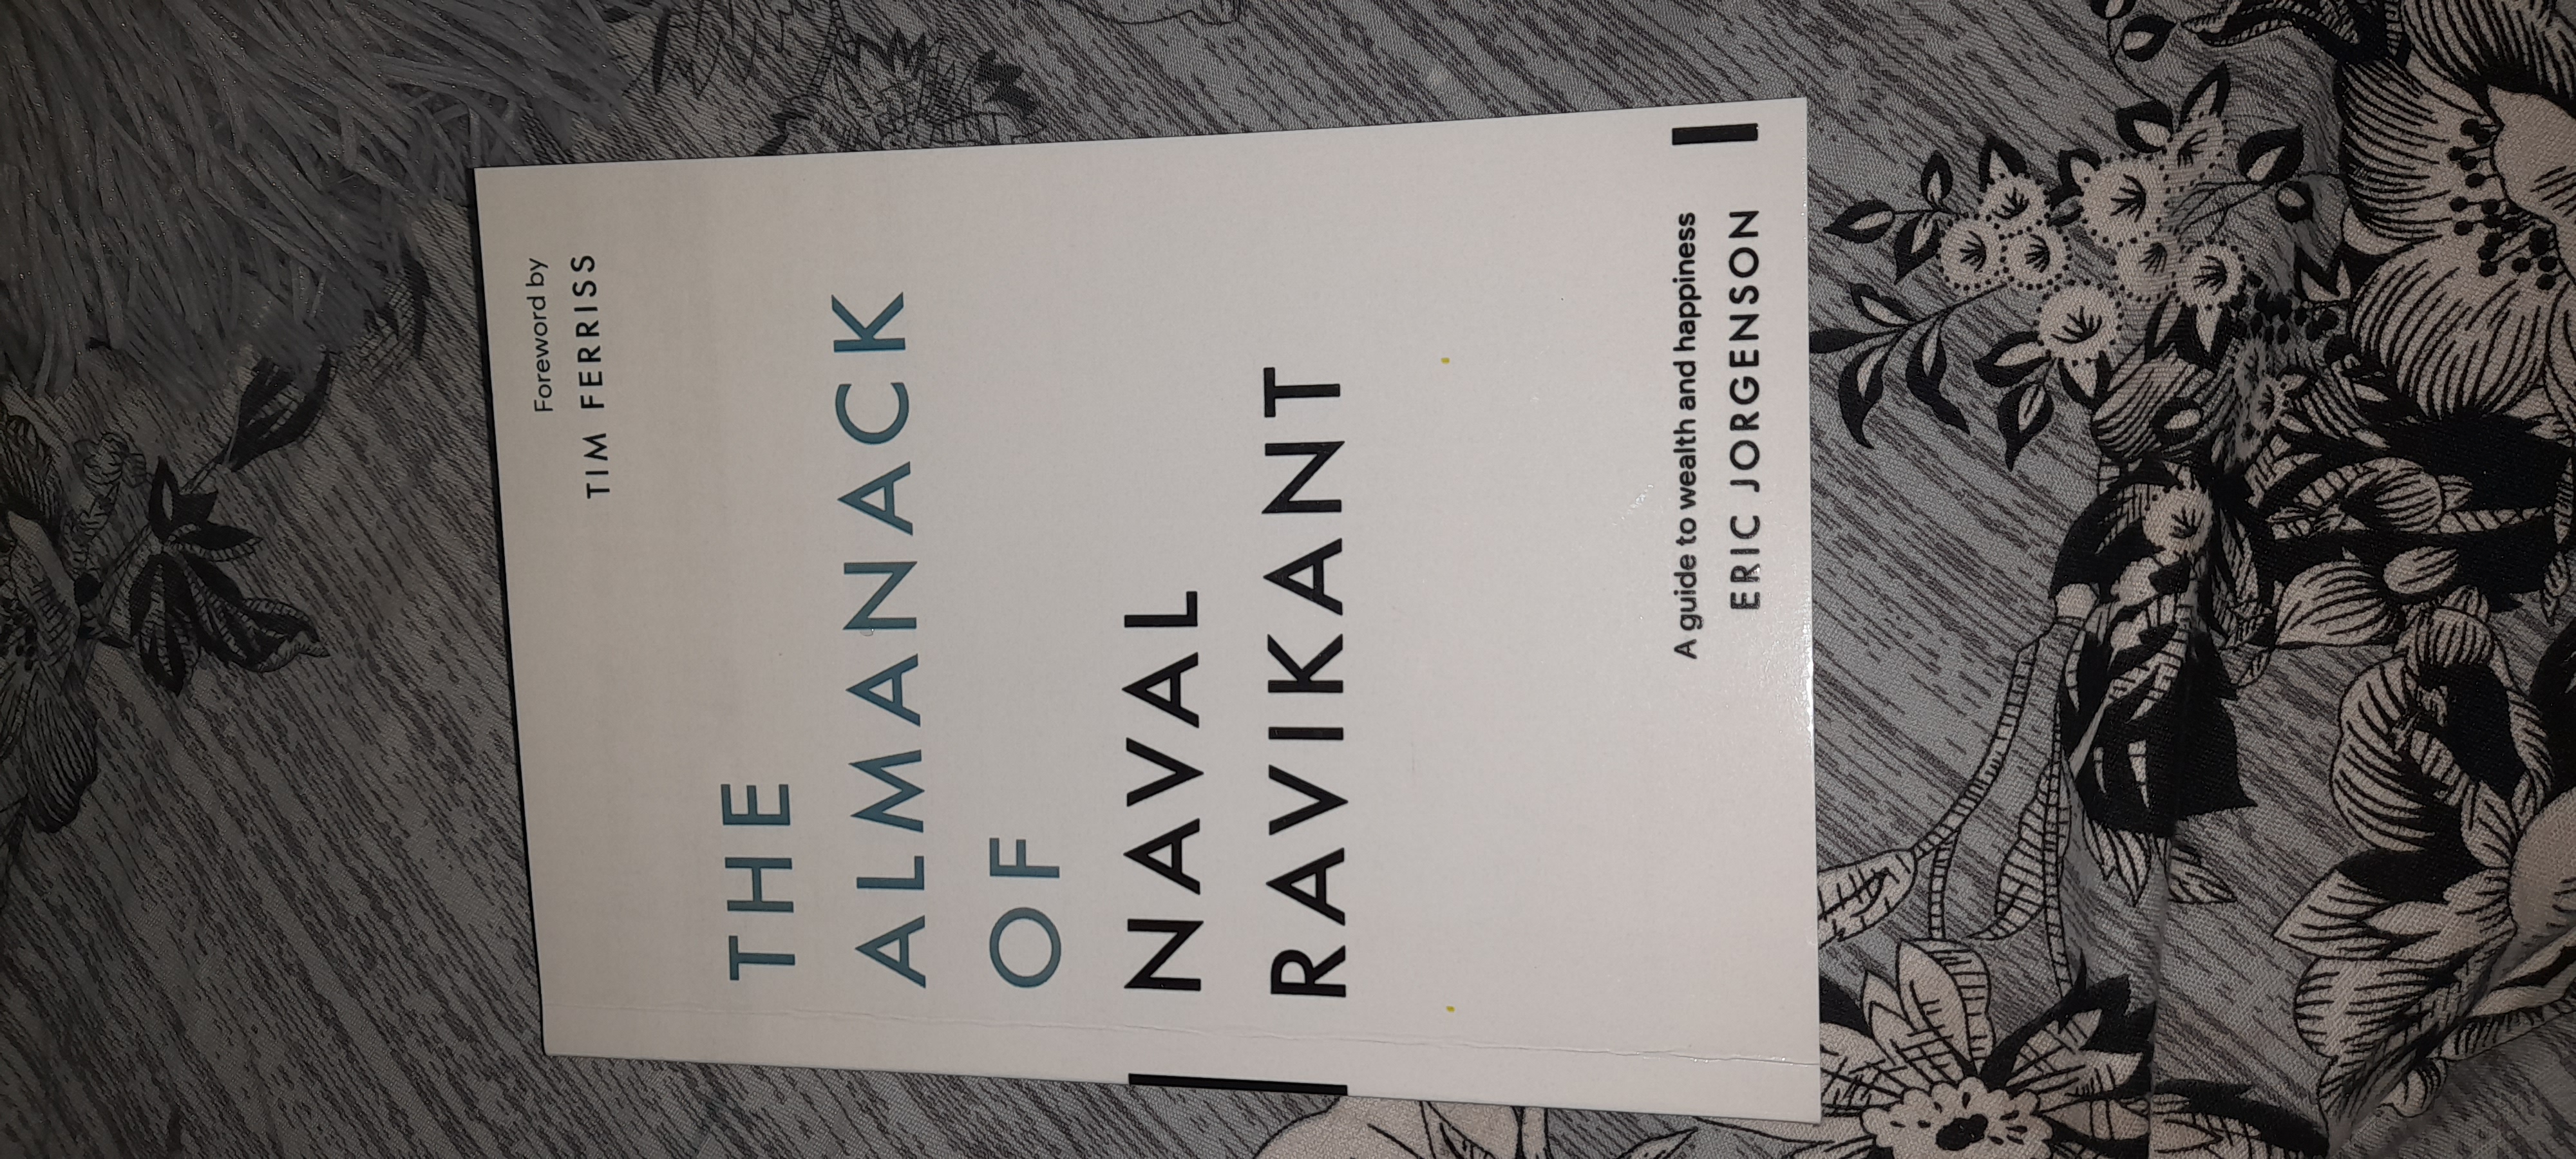 The Almanack of Naval Ravikant by Eric Jorgenson -  -  Pakistan's Largest Bookstore & Printing Services